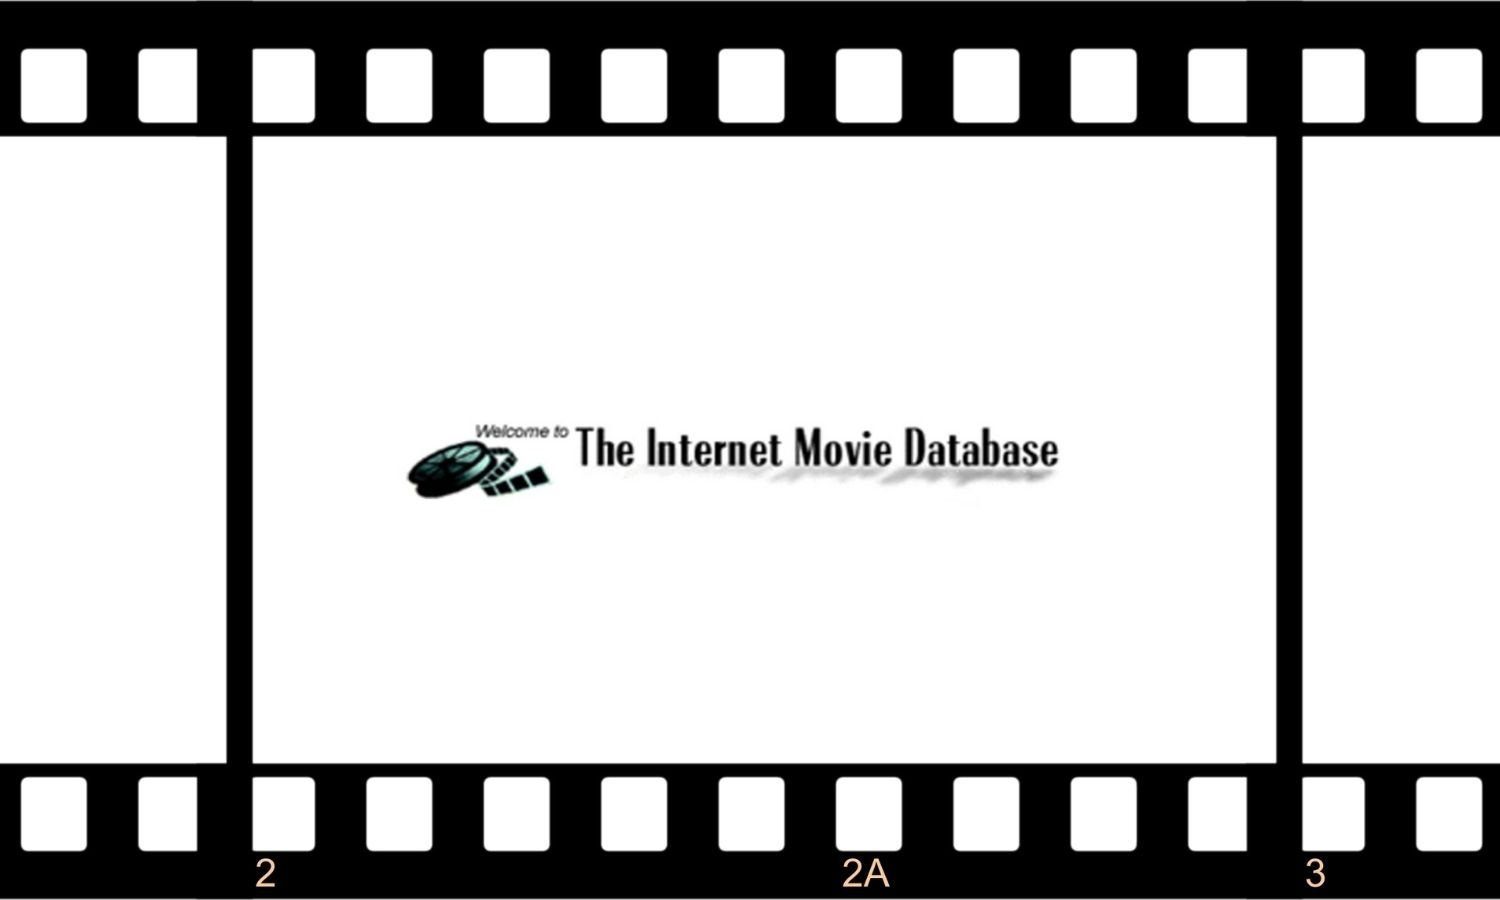 OTD in 1990: IMDB (Internet Movie Database) was founded. It was incorporated as a website in January 1996.